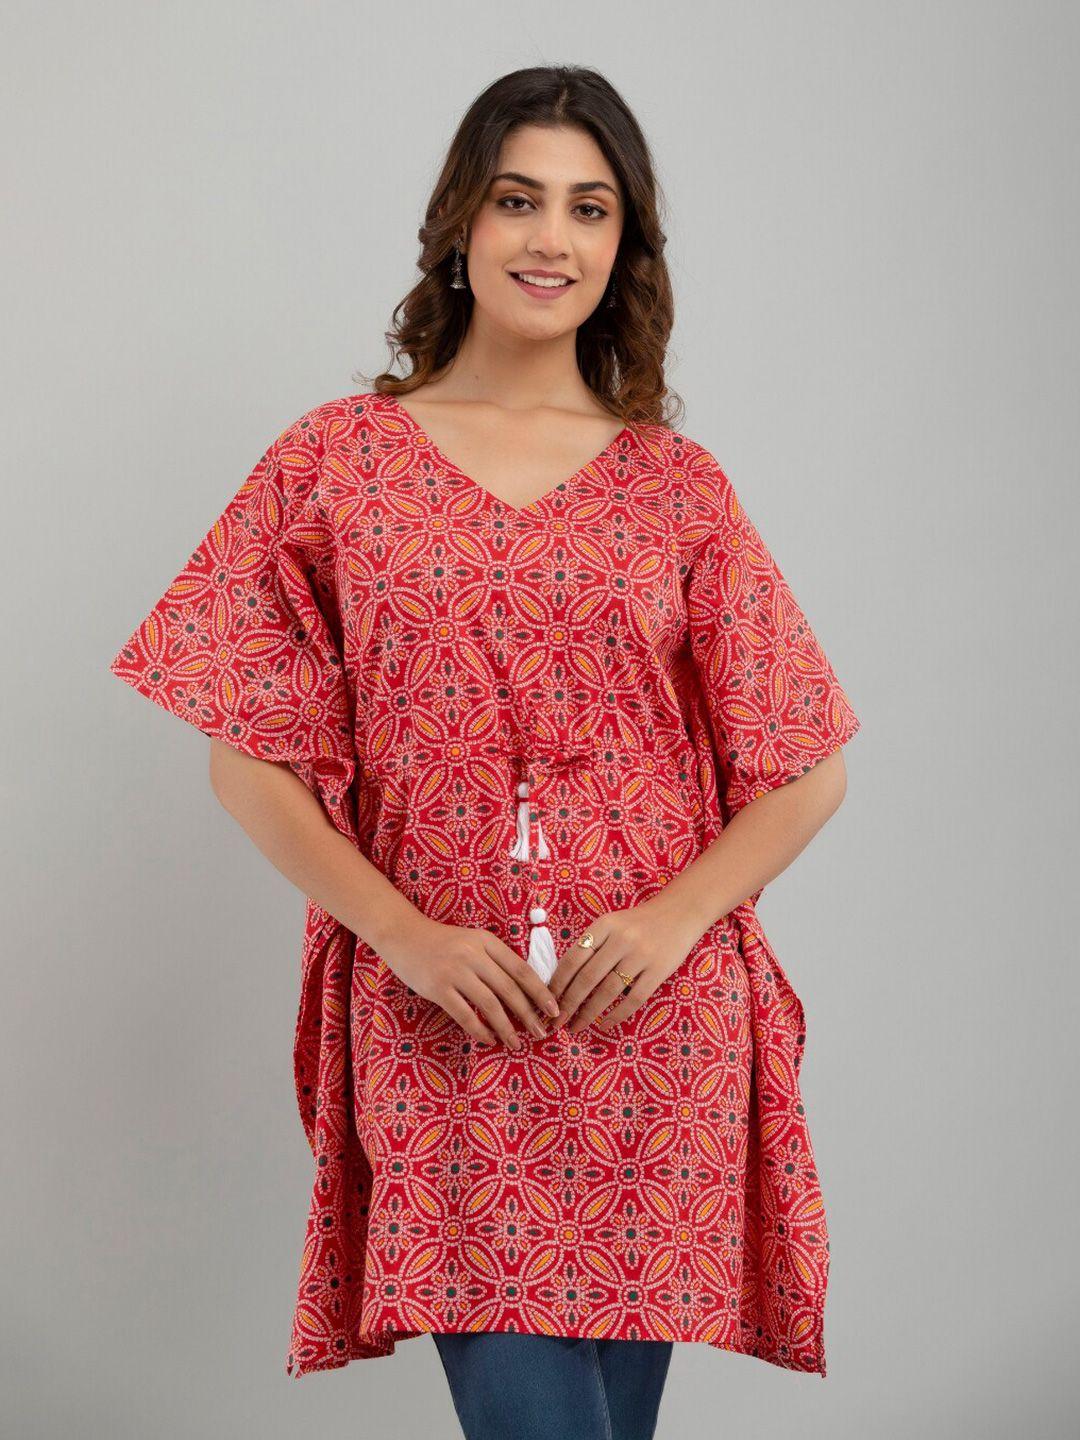 frionkandy red floral print flared sleeve cotton kaftan longline top